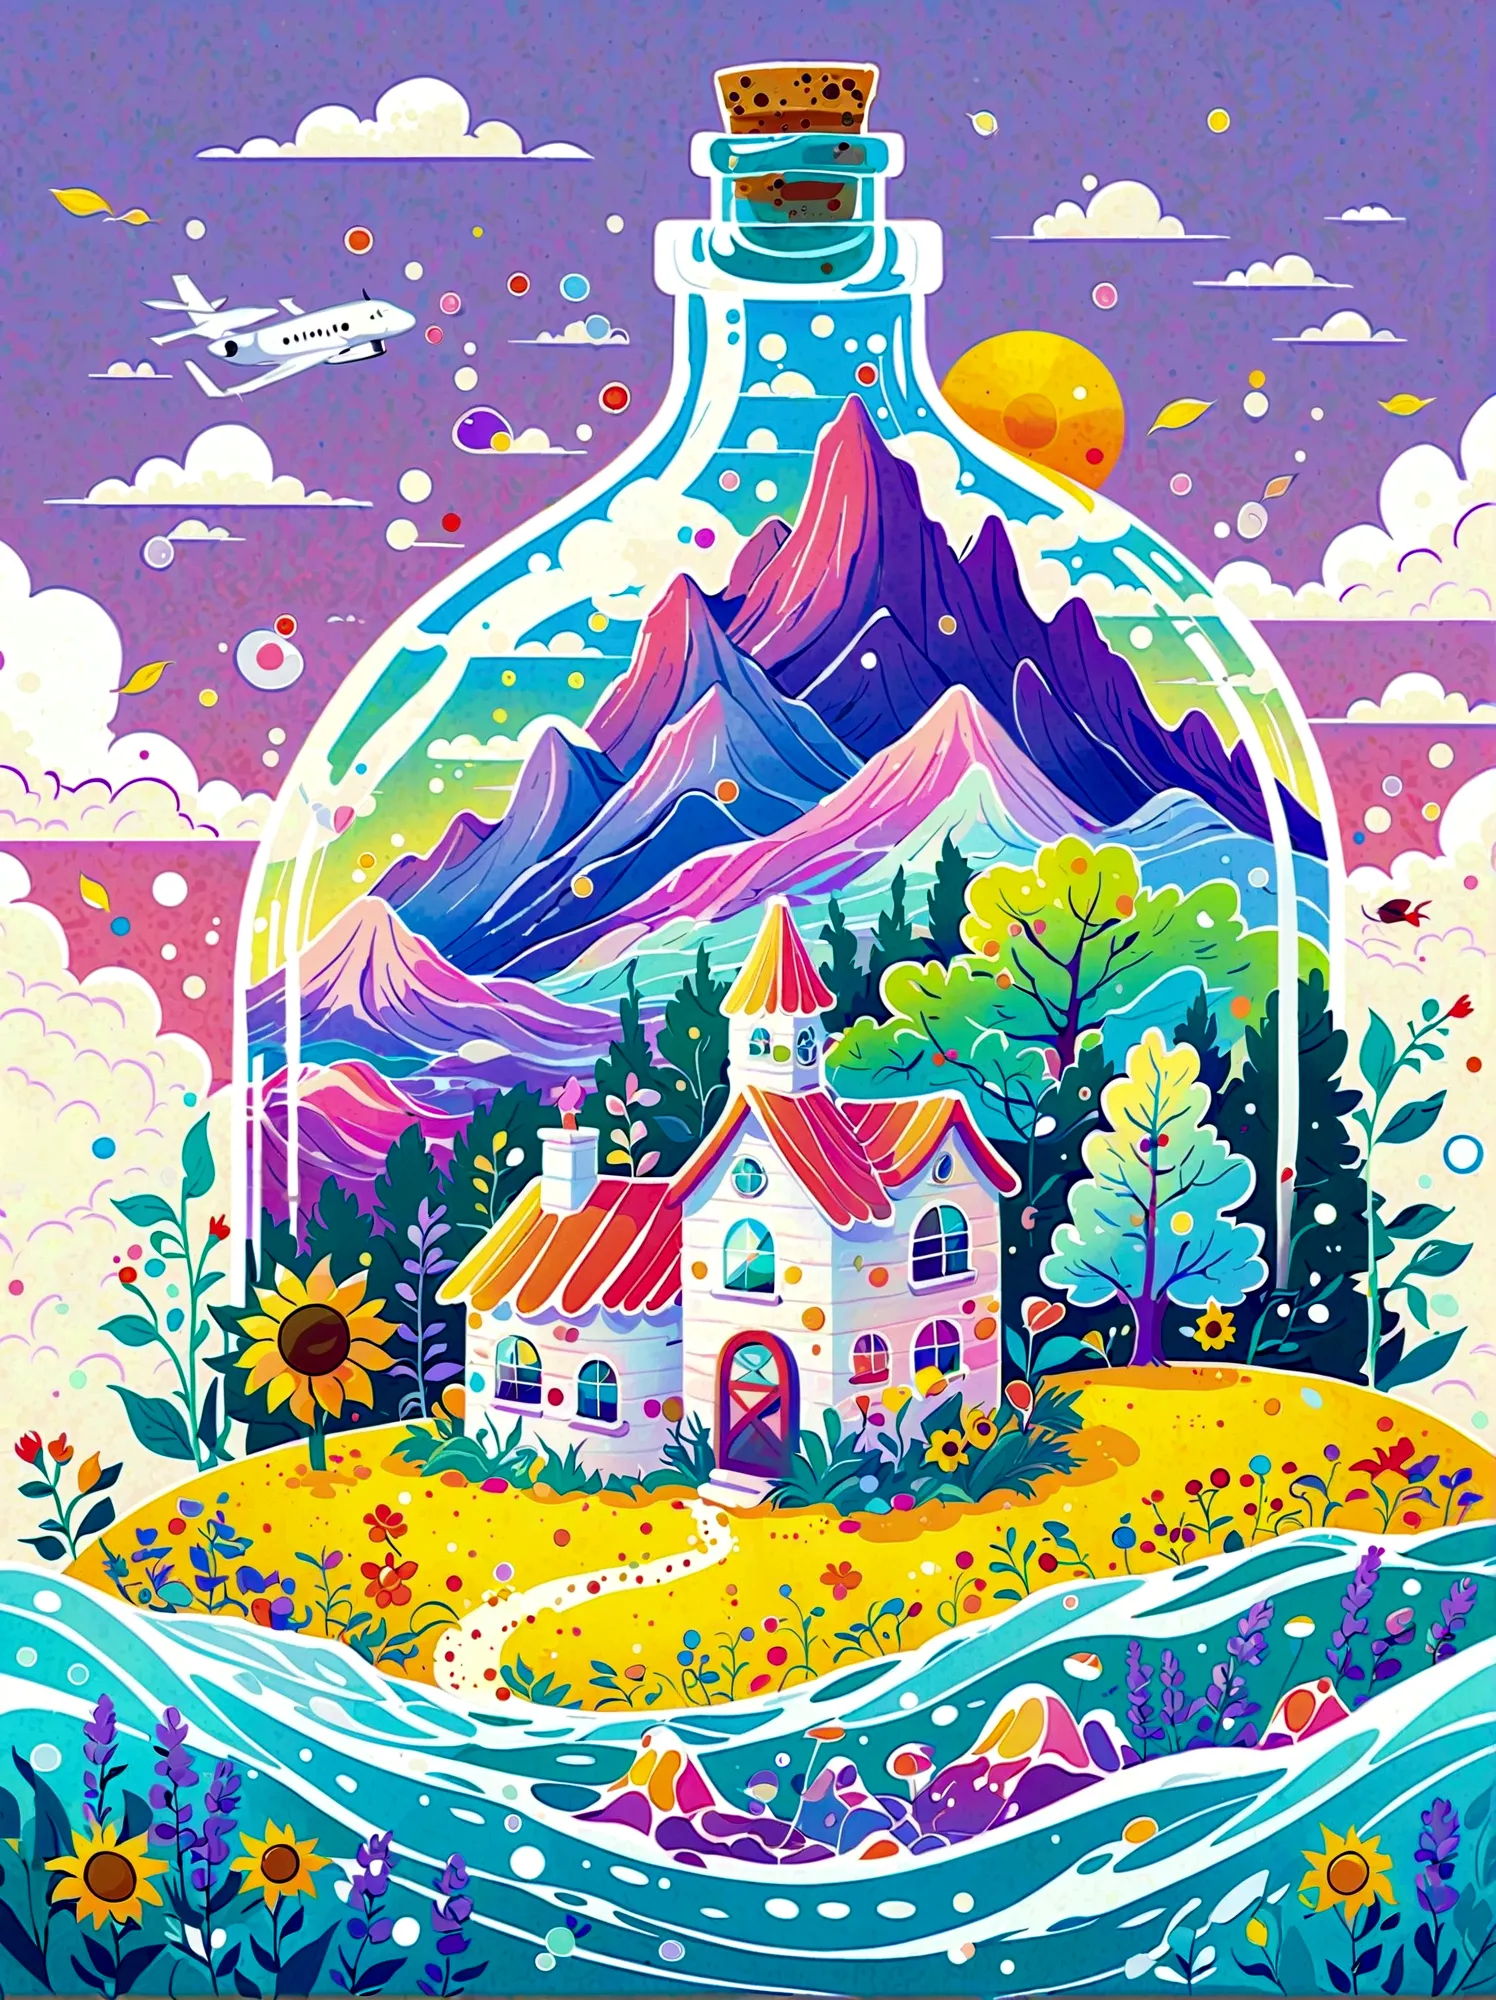 (flat, user interface vector style), (world in a bottle), heavenly colors, colorful fantasy candy house, fairy tale world, sprin...